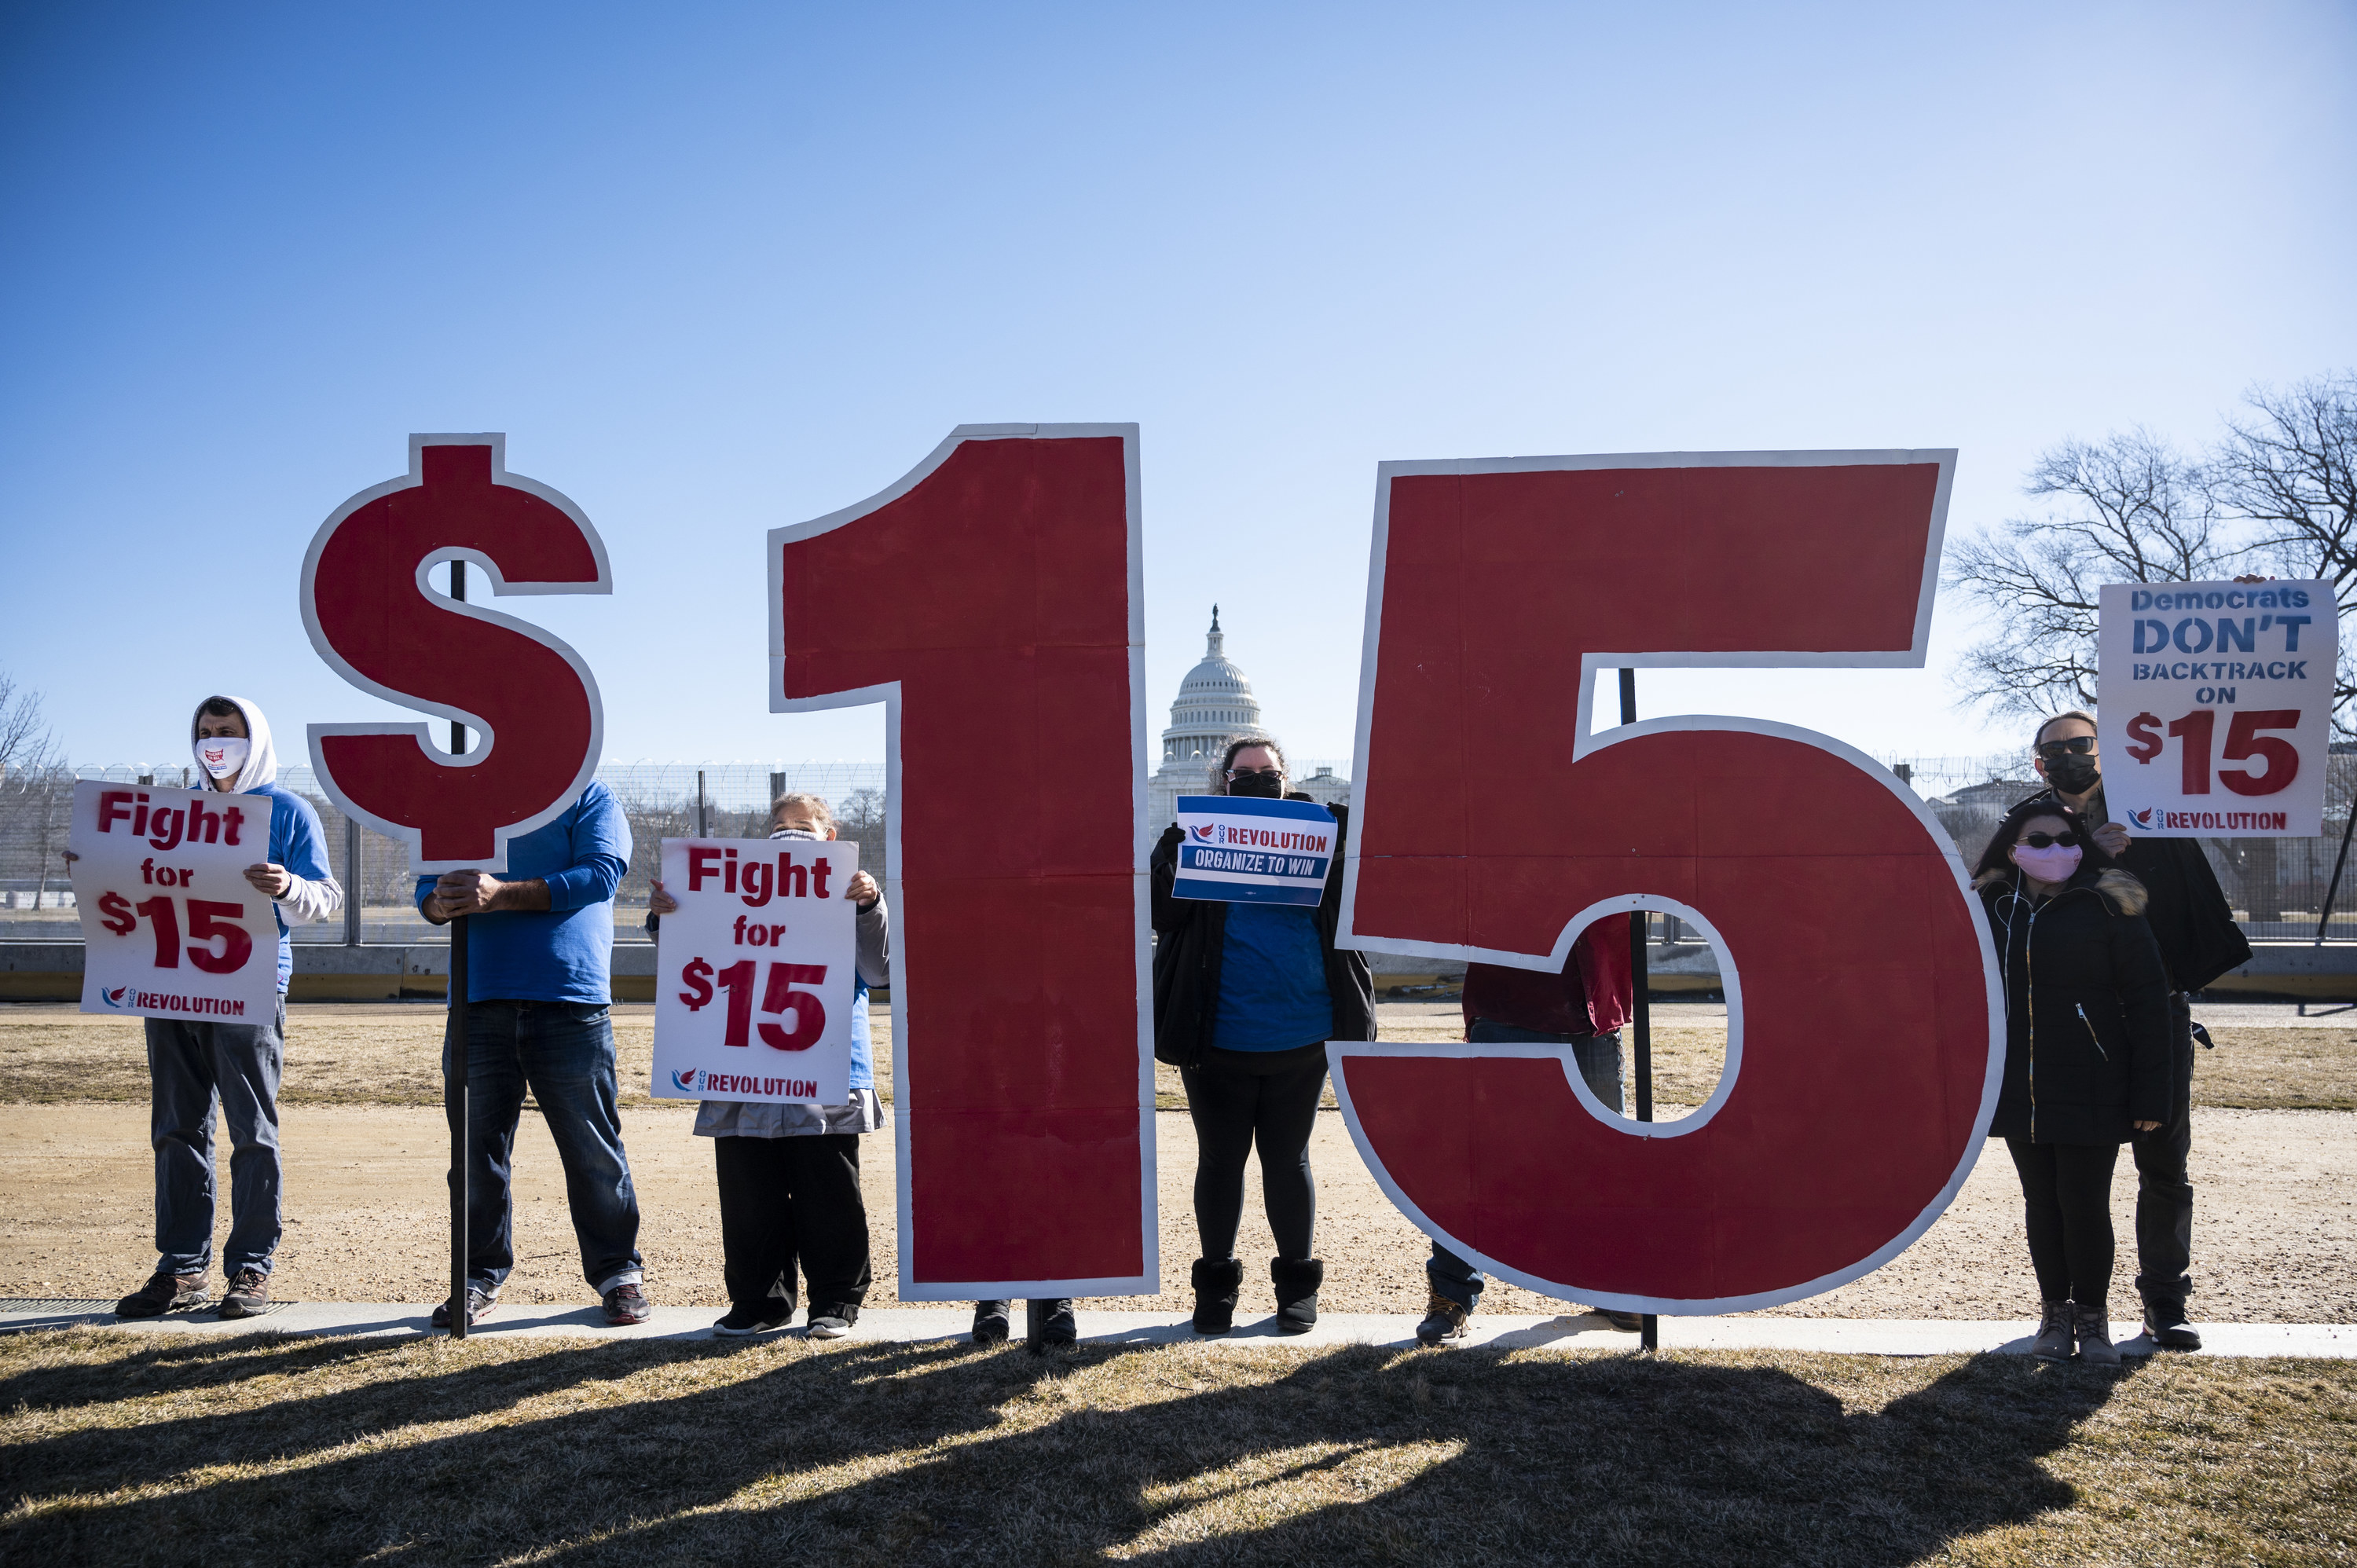 Activists outside Congress with signs supporting a $15 minimum wage in the US